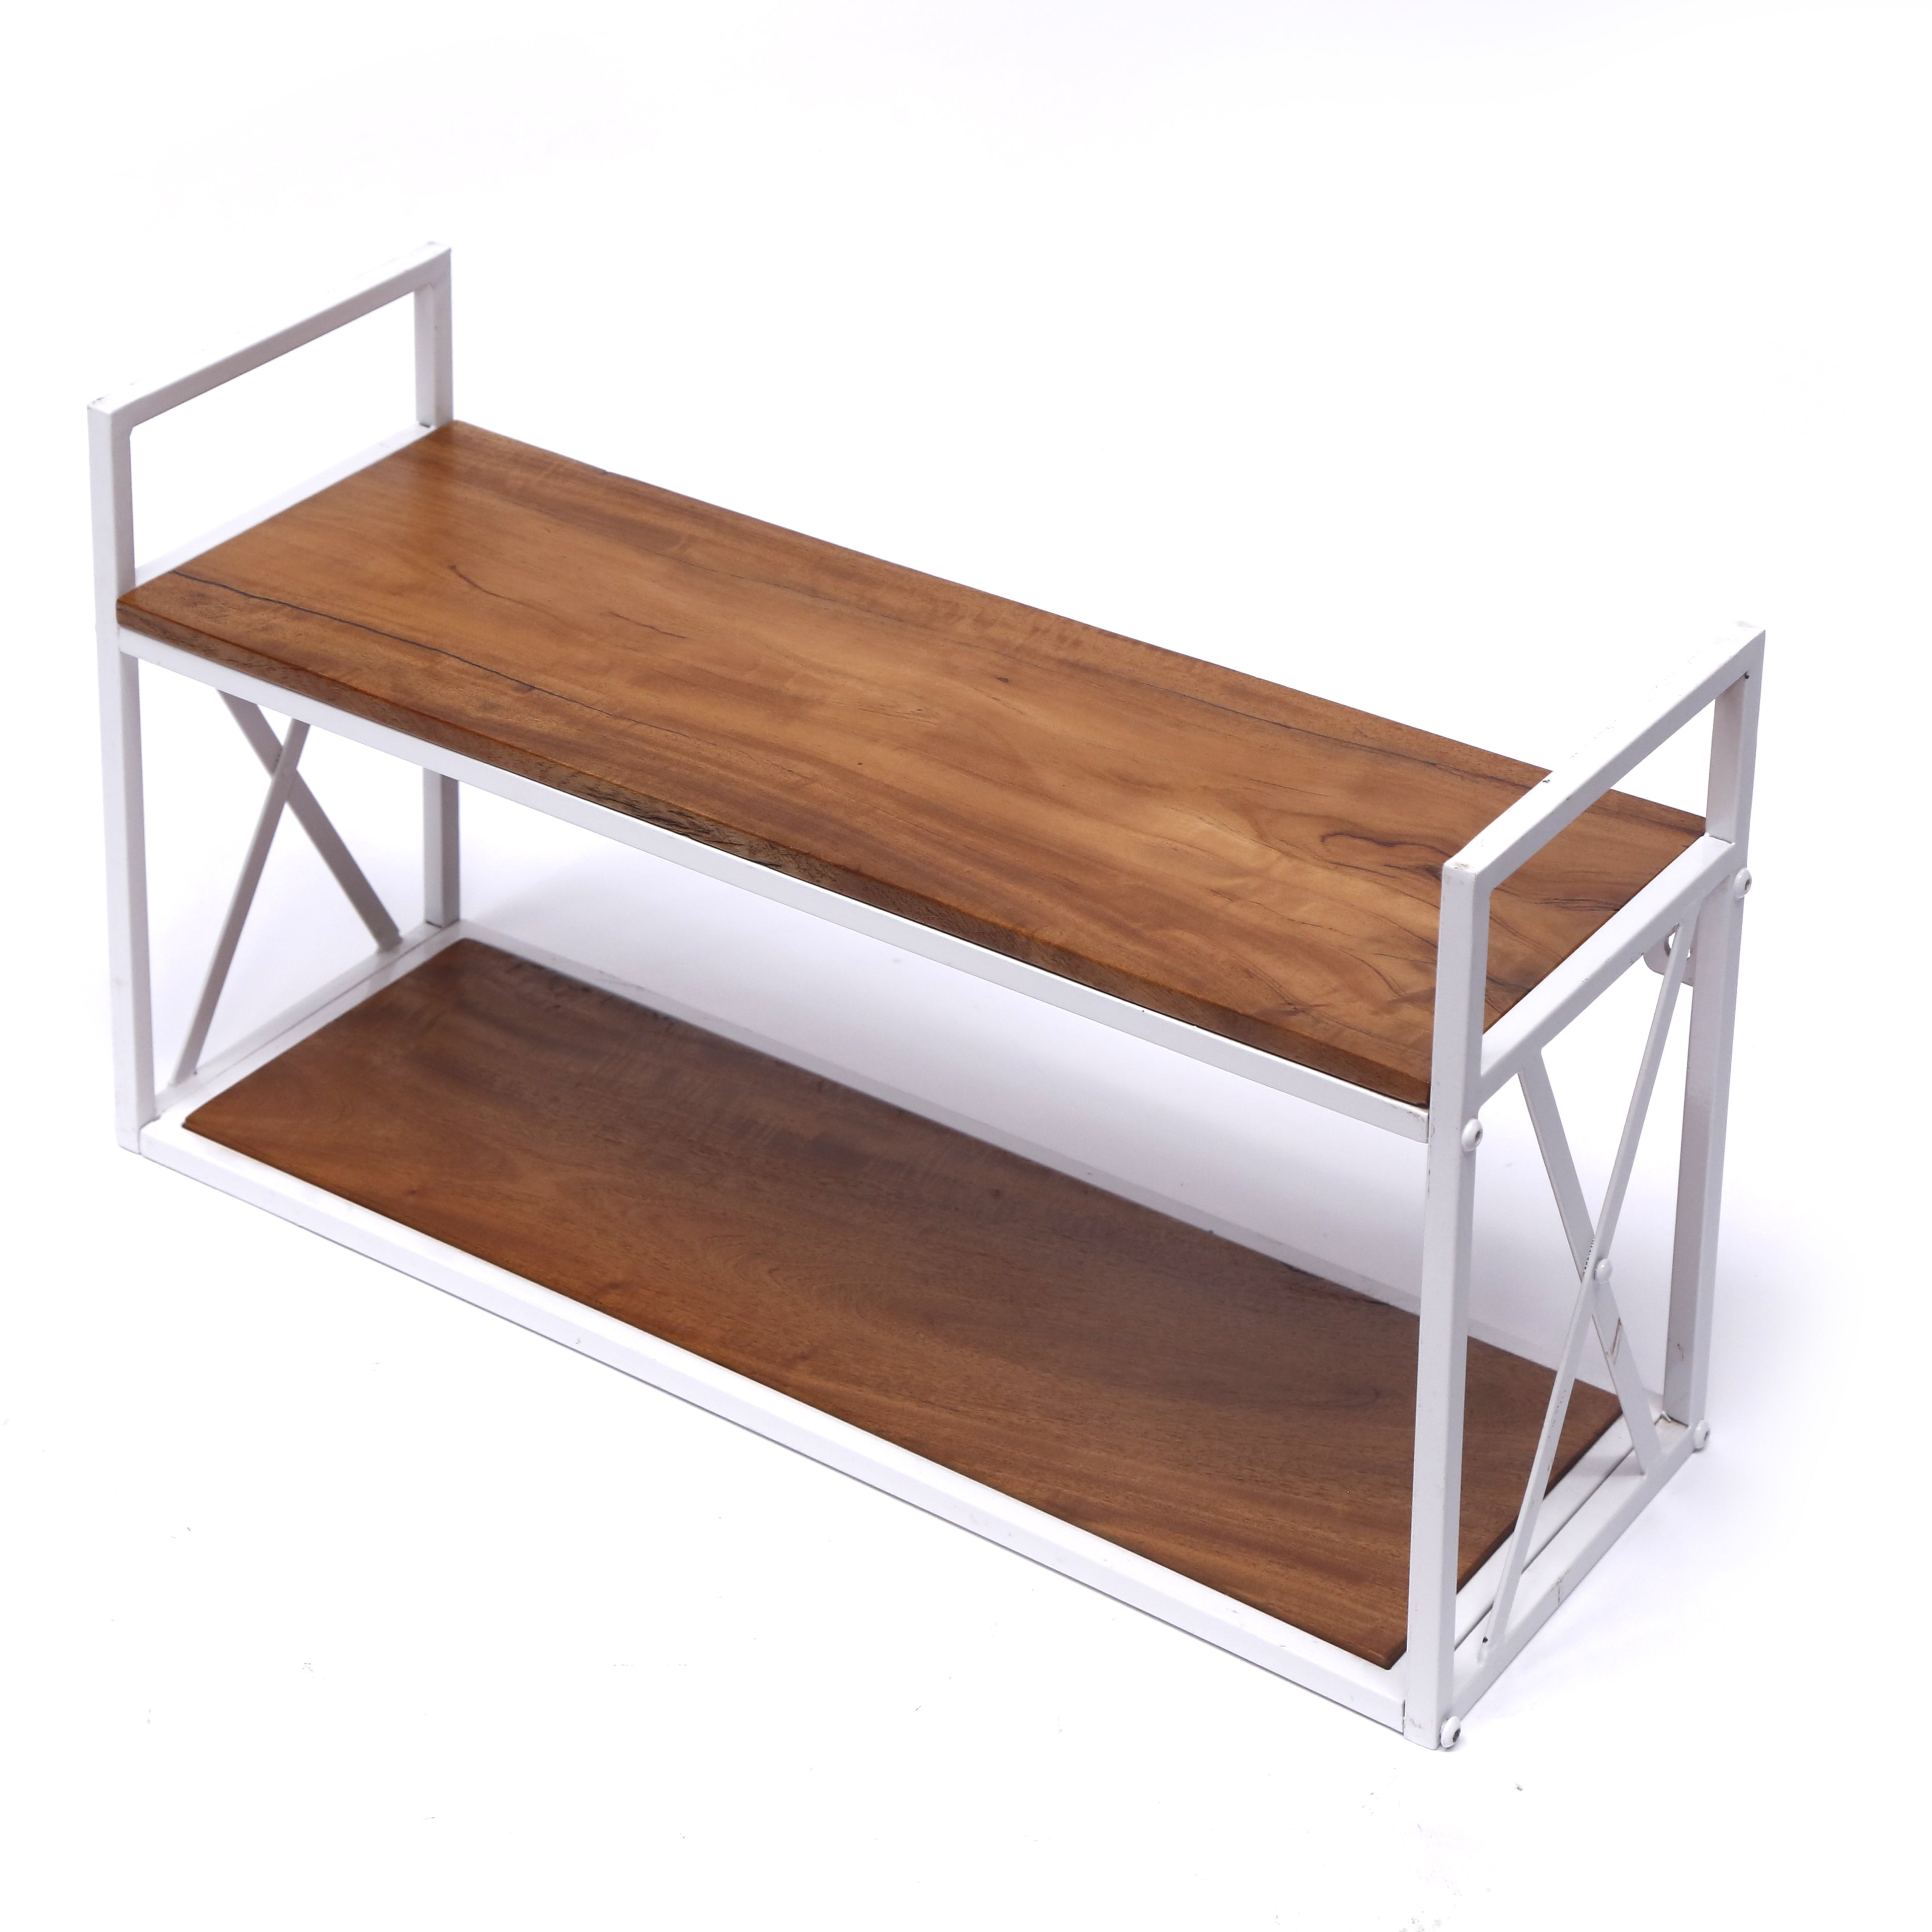 Wooden Wall Rack with Iron Frame Rack